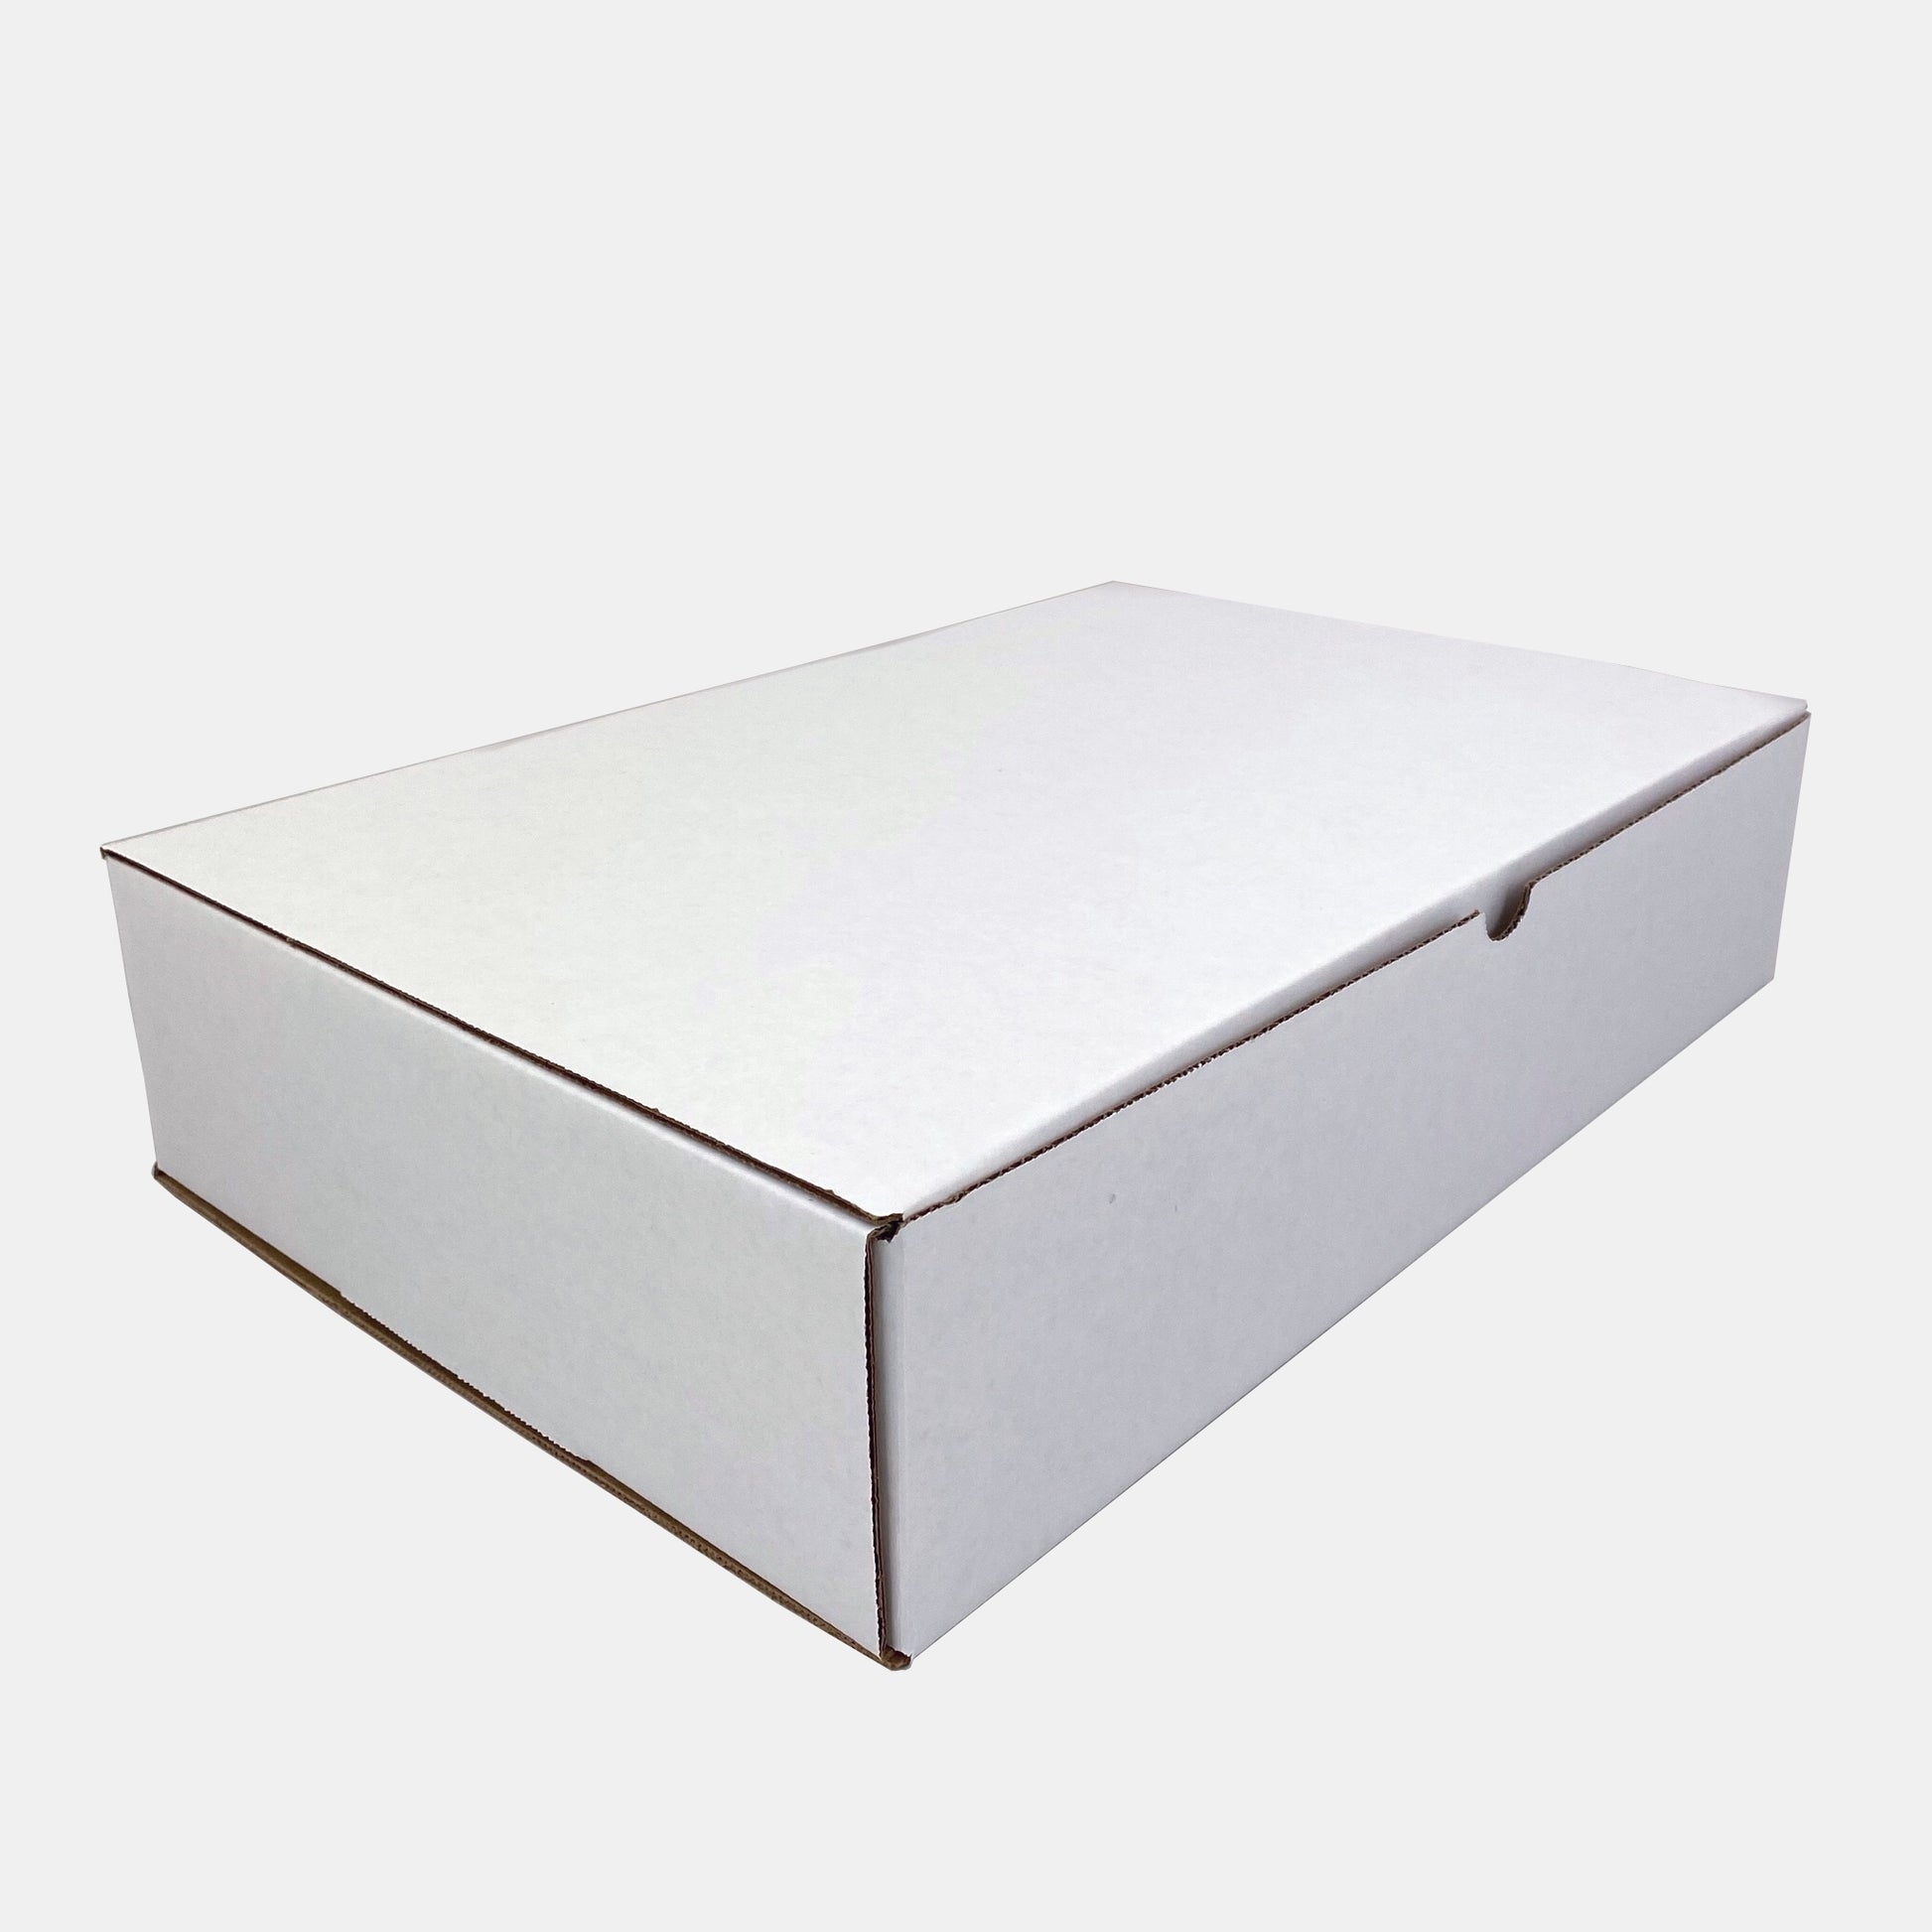 Small Boxes, Small Shipping Boxes, Small Cube Boxes in Stock - ULINE